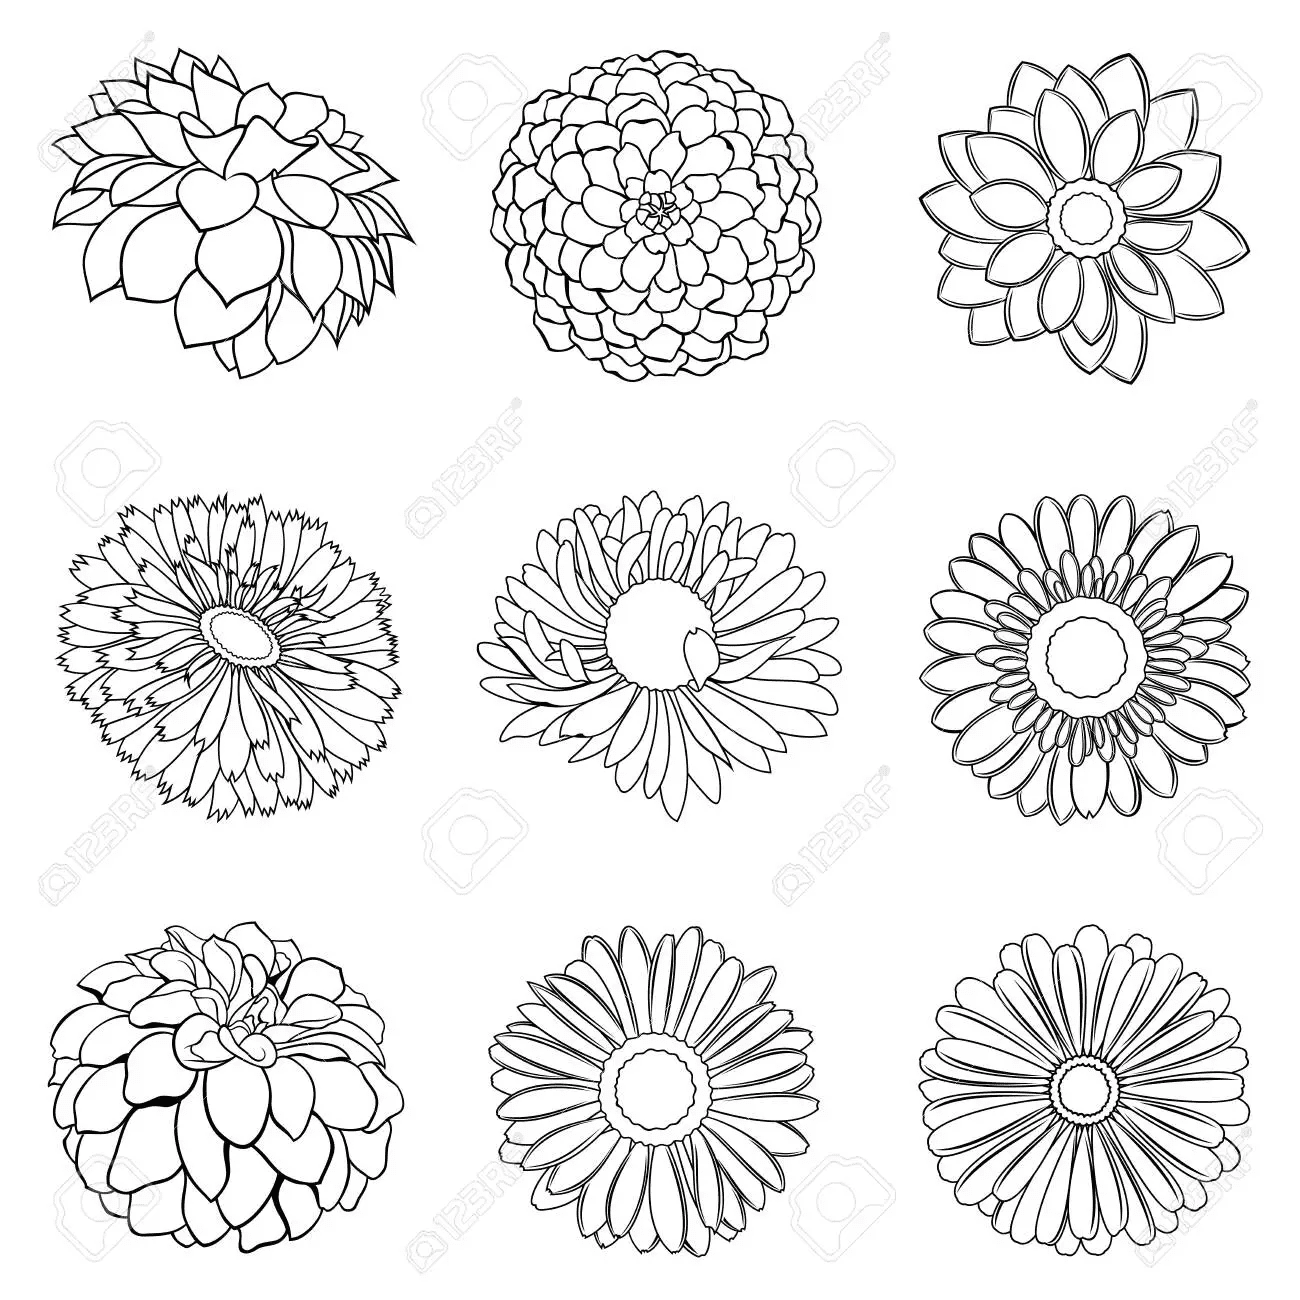 Dahlia Flower To Print Coloring Page